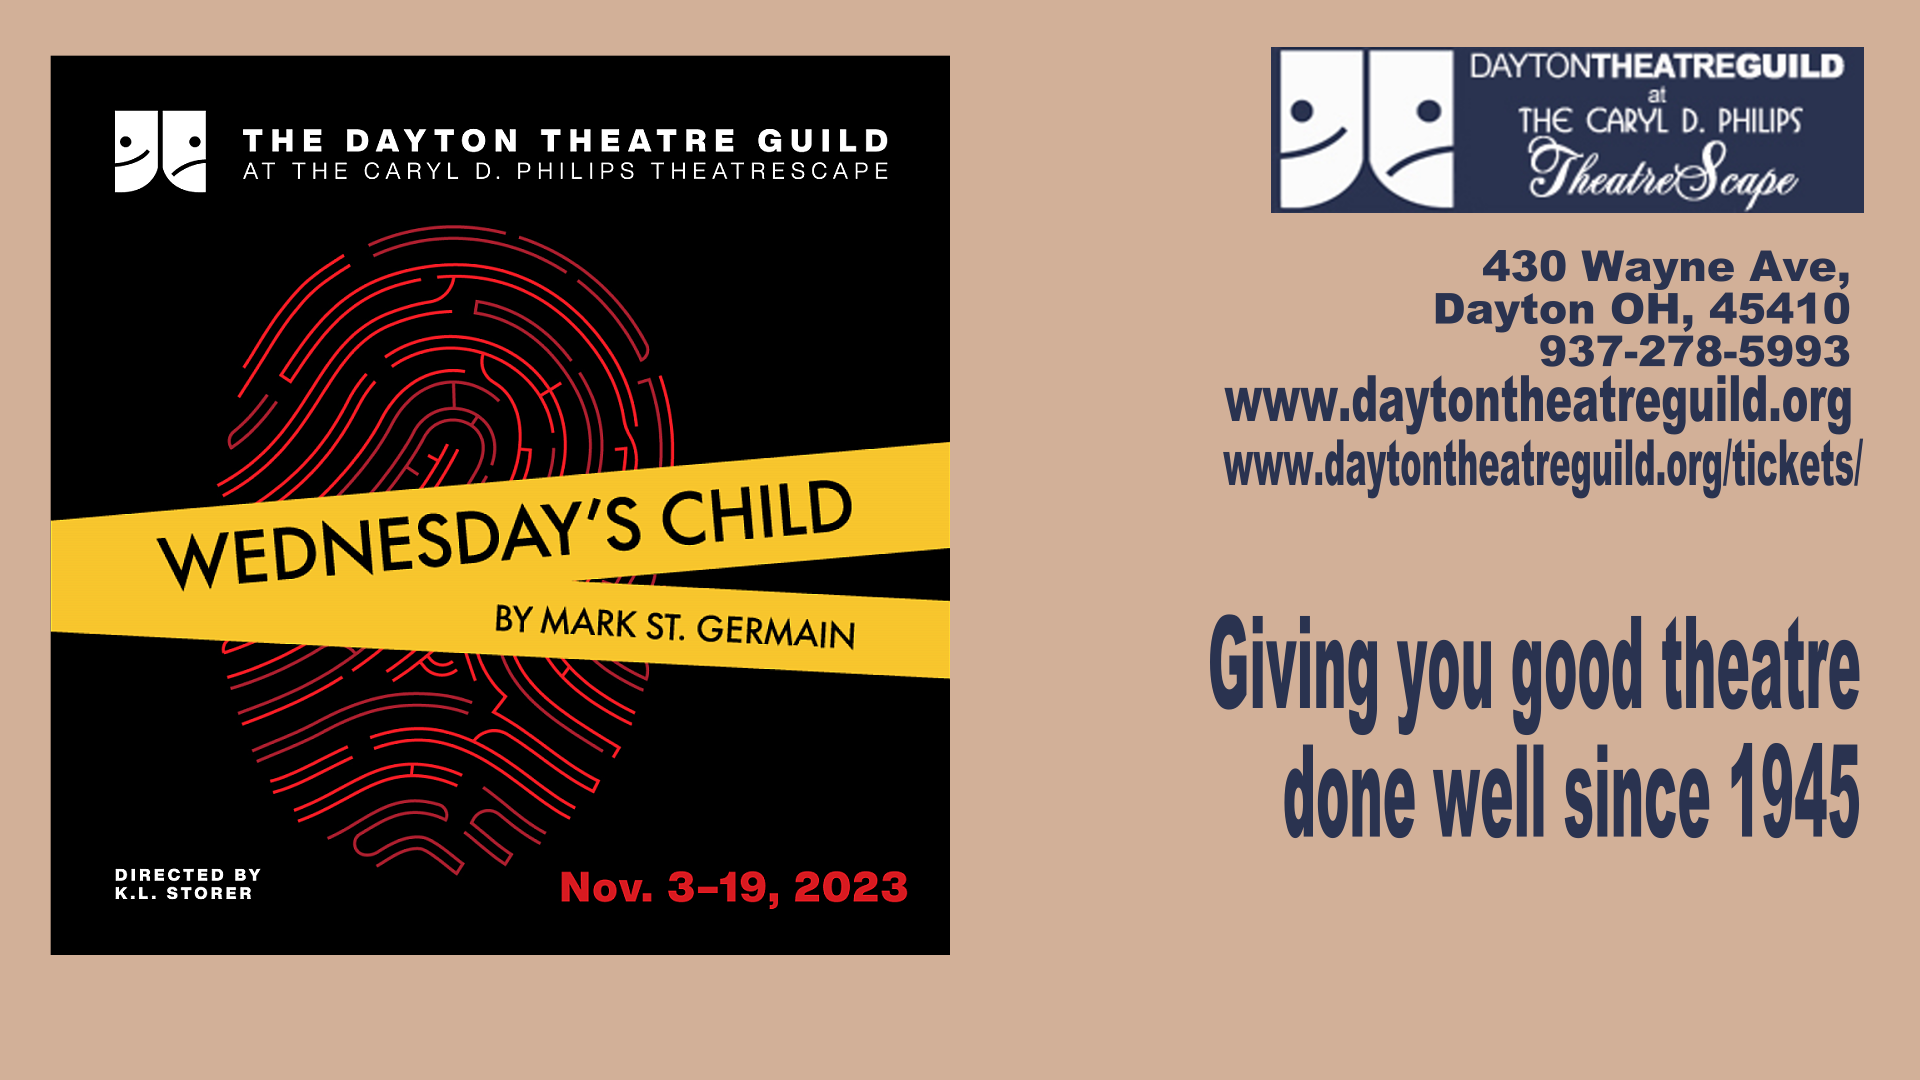 WEDNESDAY'S CHILD, by Mark St. Germain's at The Dayton Theatre Guild.